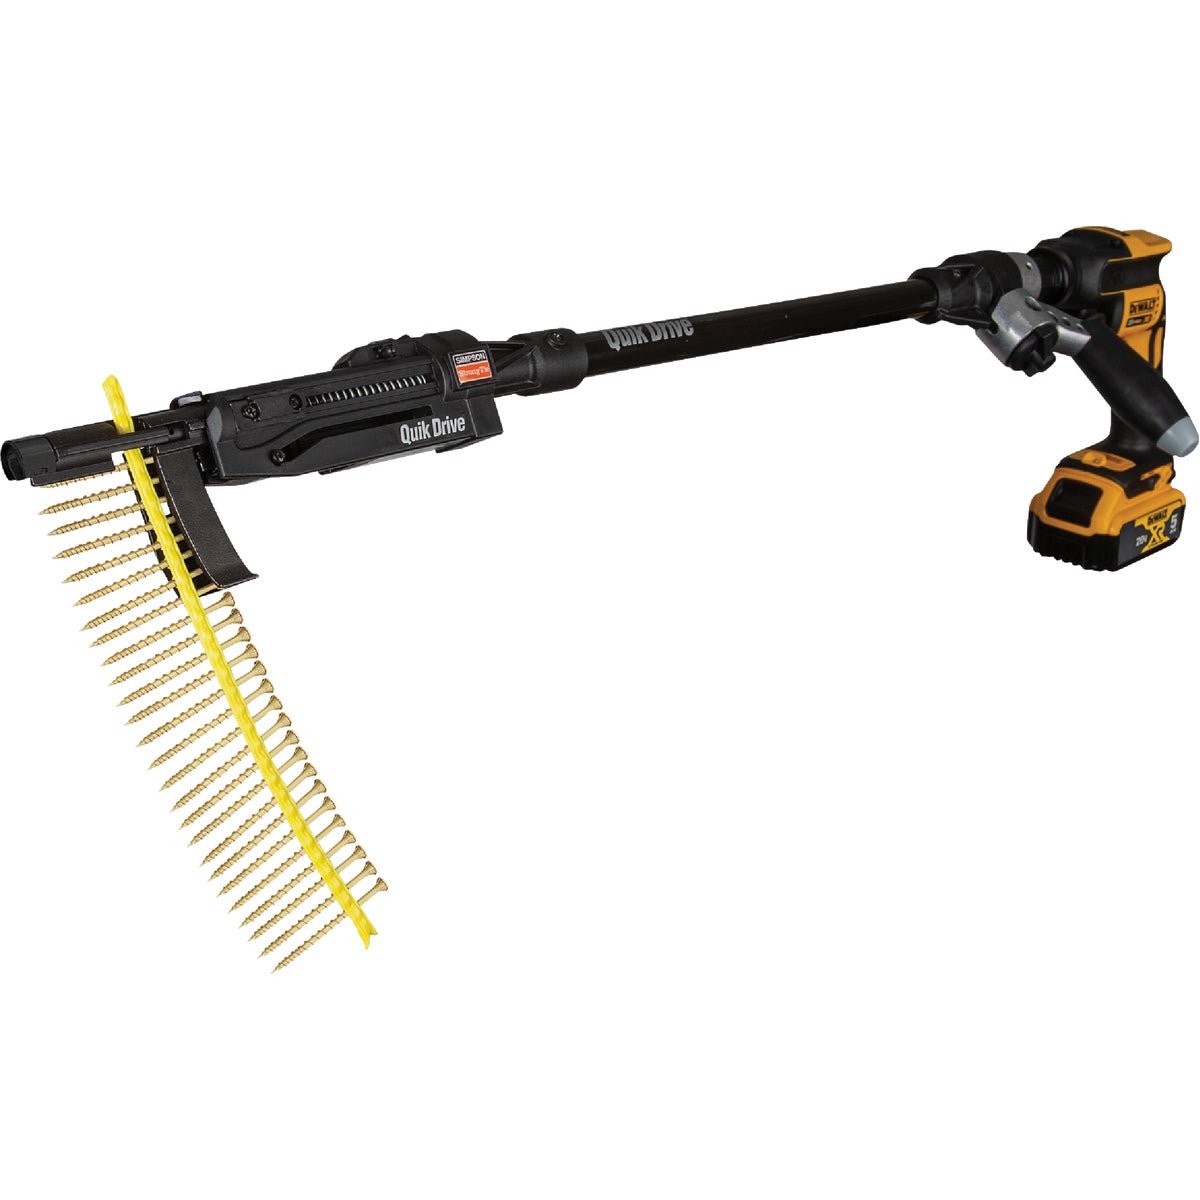 Simpson Strong-Tie Quik Drive Decking System with DEWALT 20V MAX Cordless Screwdriver